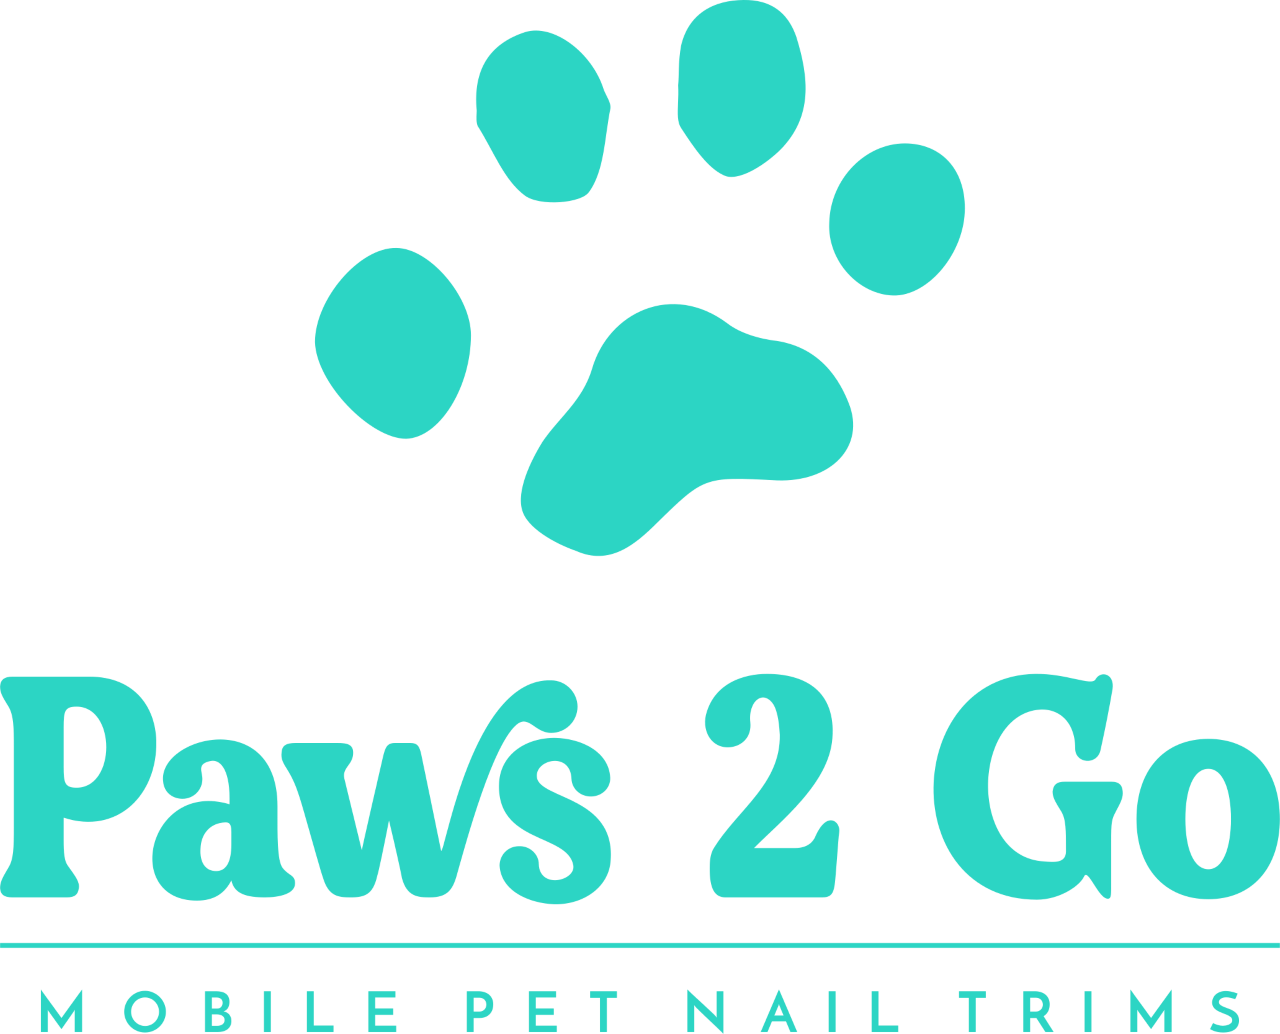 Cartoon drawing of a paw print, with the company name "paws 2 go" and the description "mobile pet nail trims" below that.